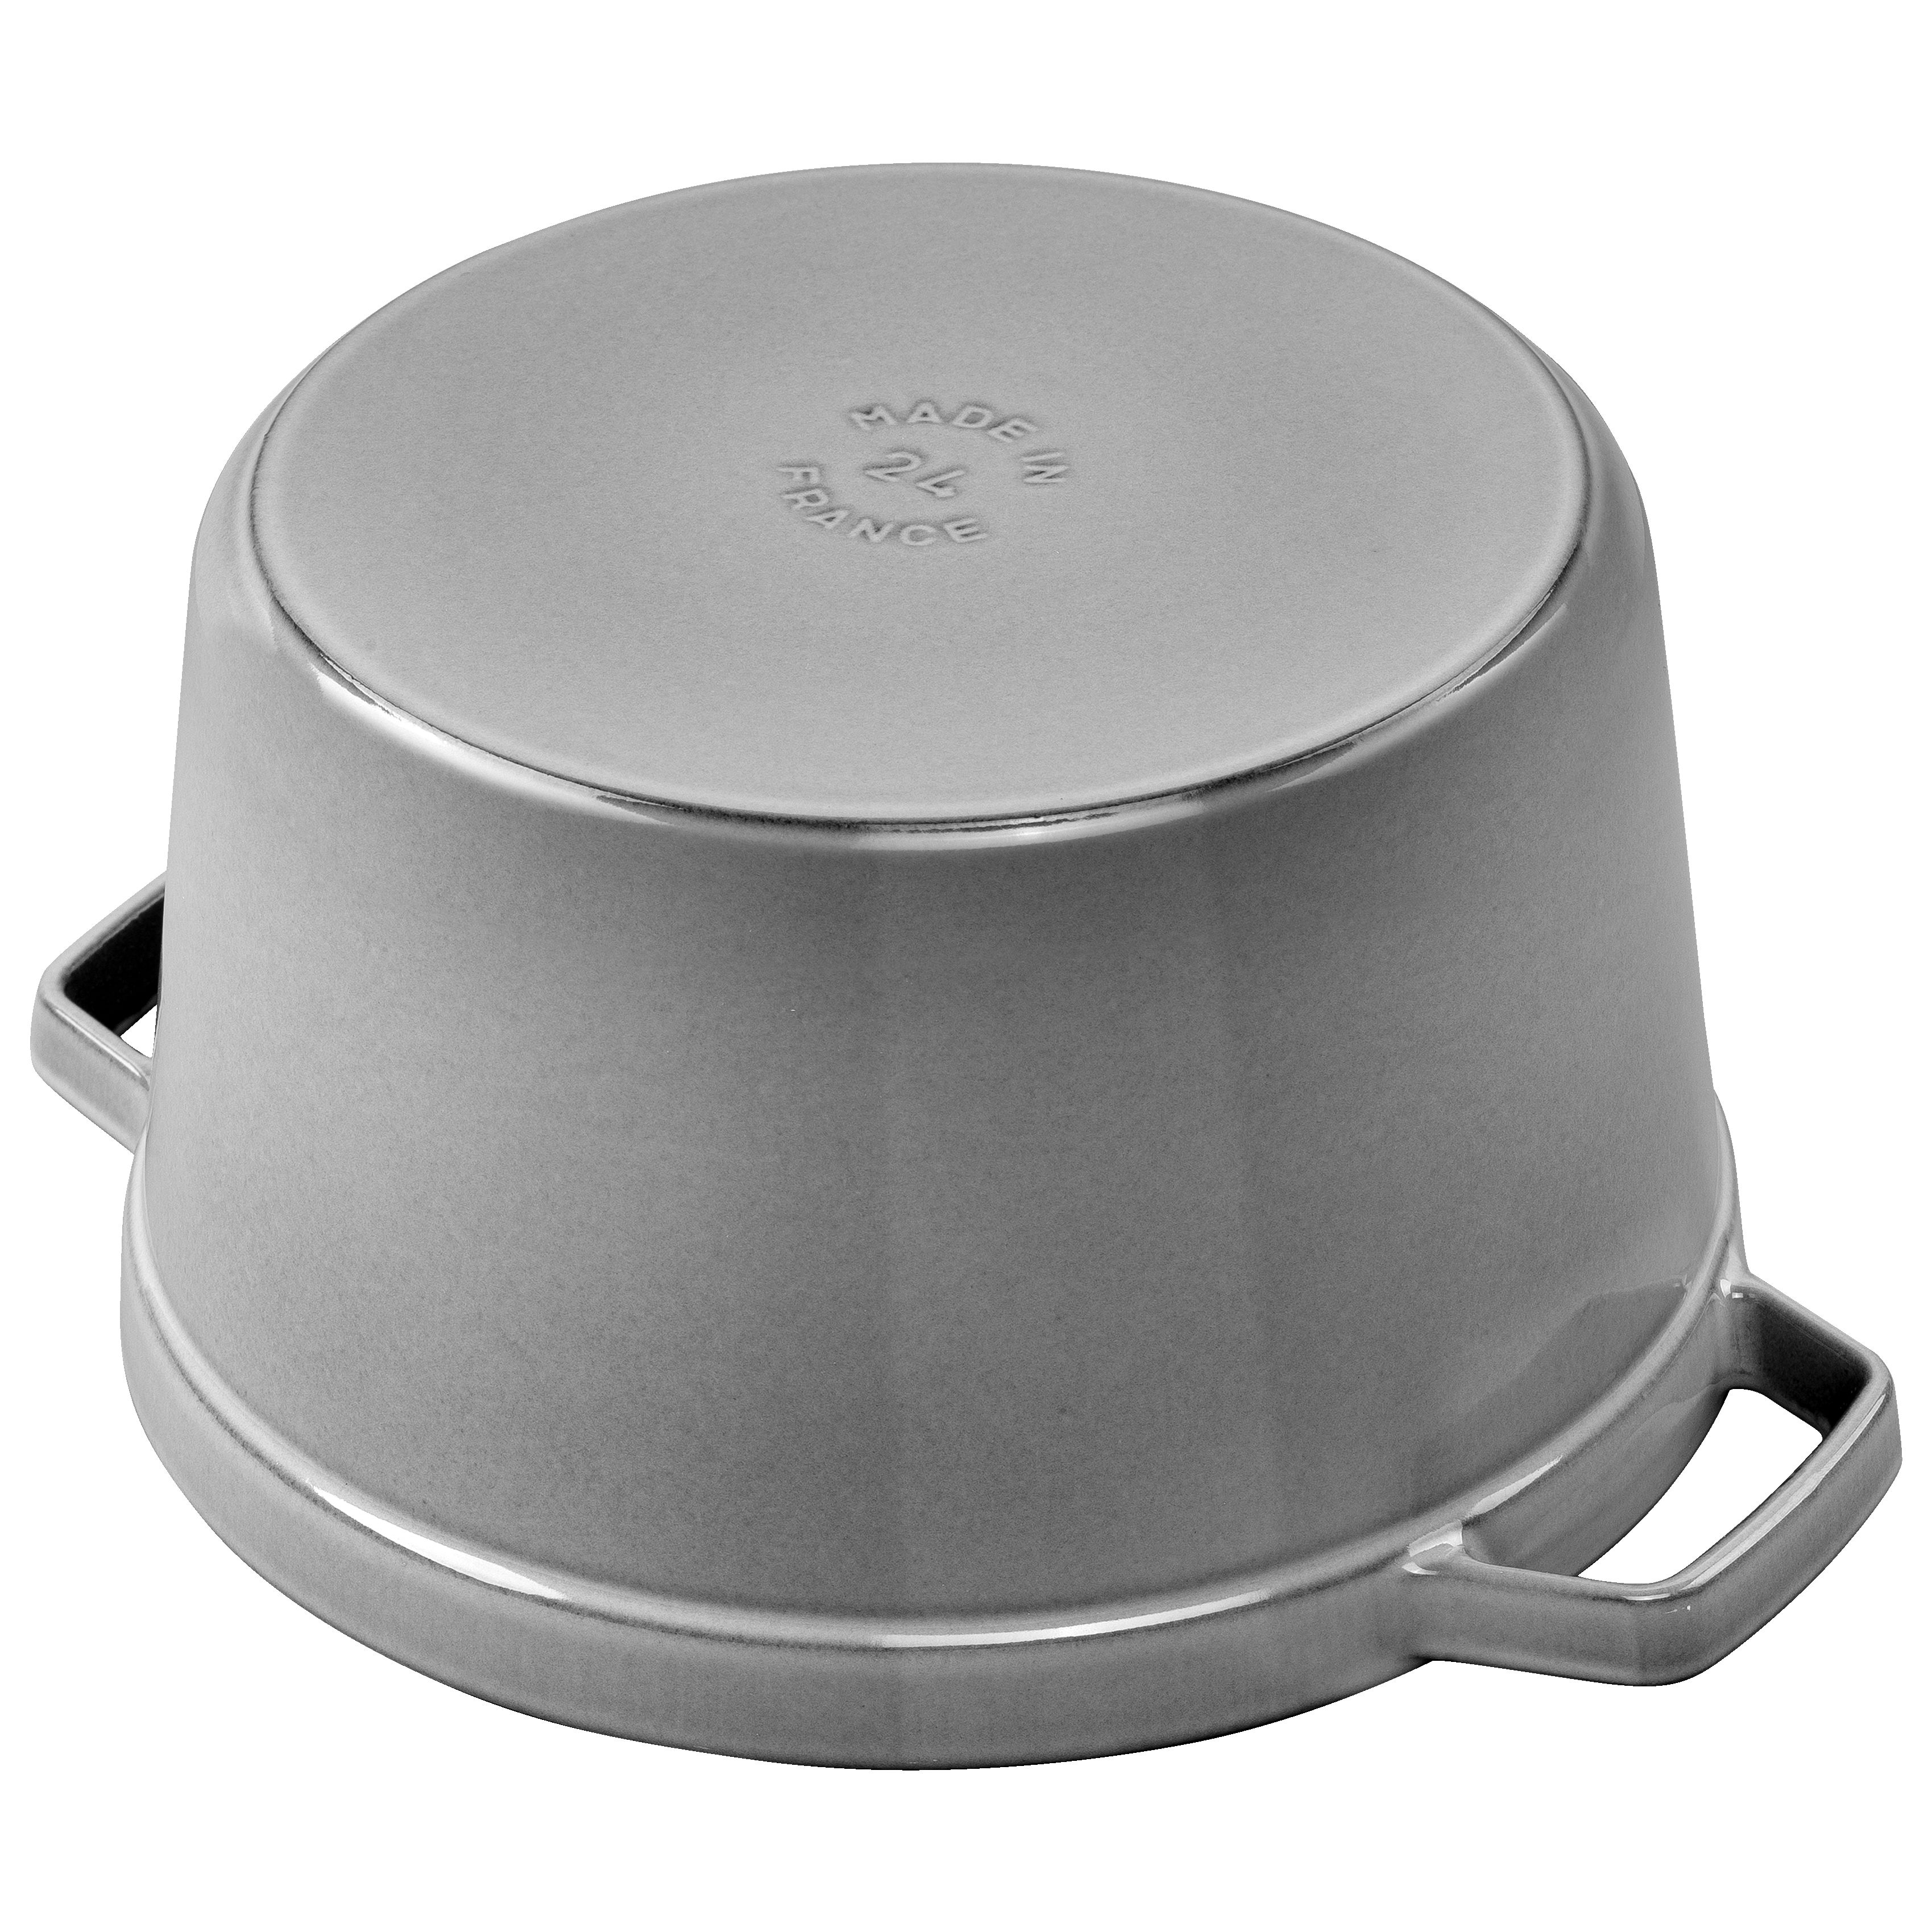 Staub Tall Round Cocotte, 5 Qt. Multiple Colors - MyToque